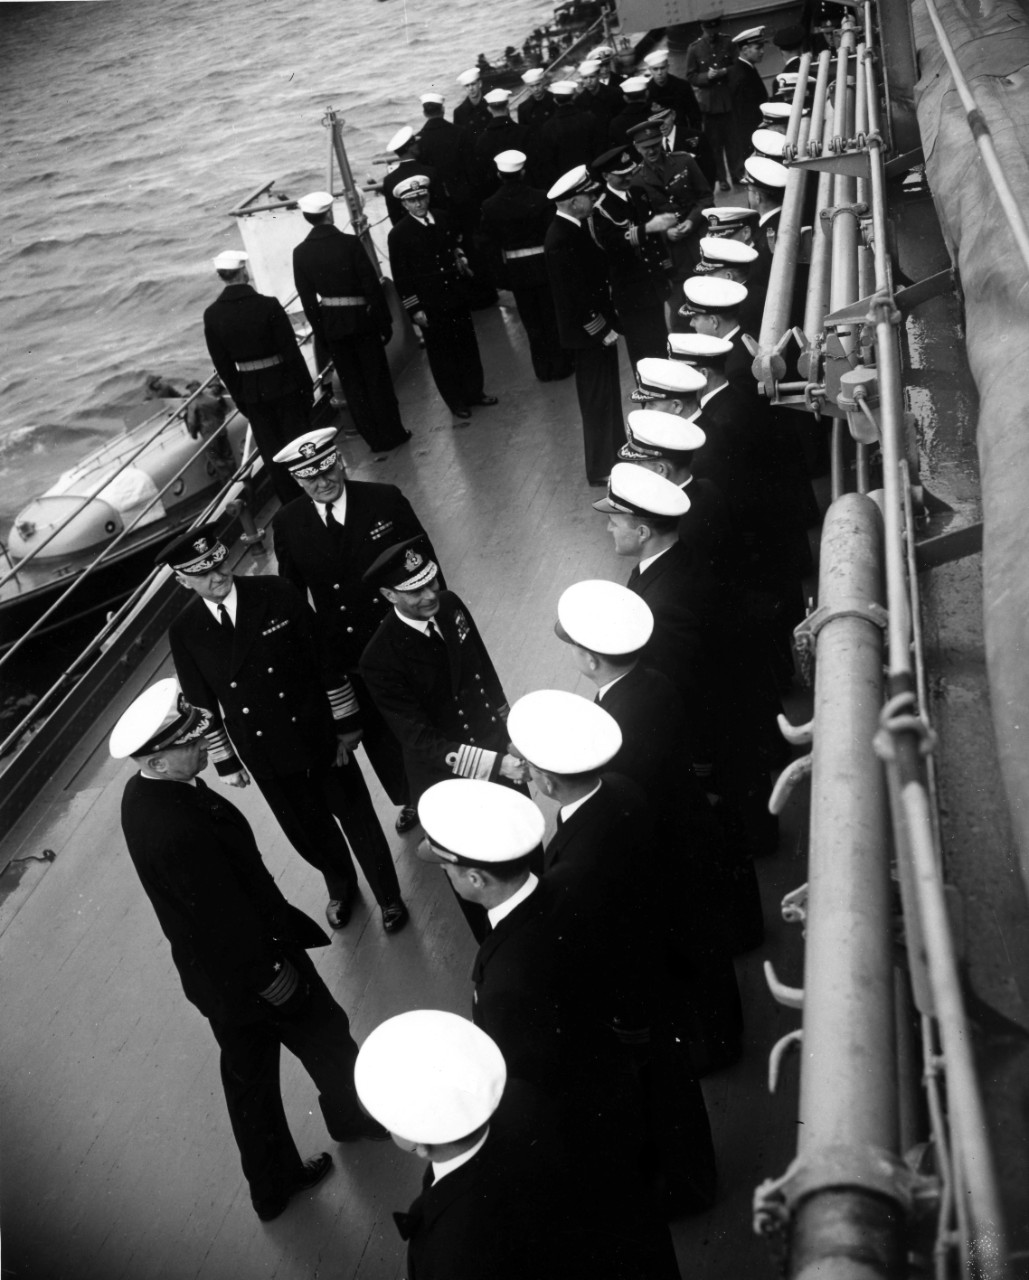 His Majesty, King George VI and his visit aboard the USS Washington (BB-56), June 1942 at Scapa Flow. From the VADM Robert C. Giffen Photo Collection. 